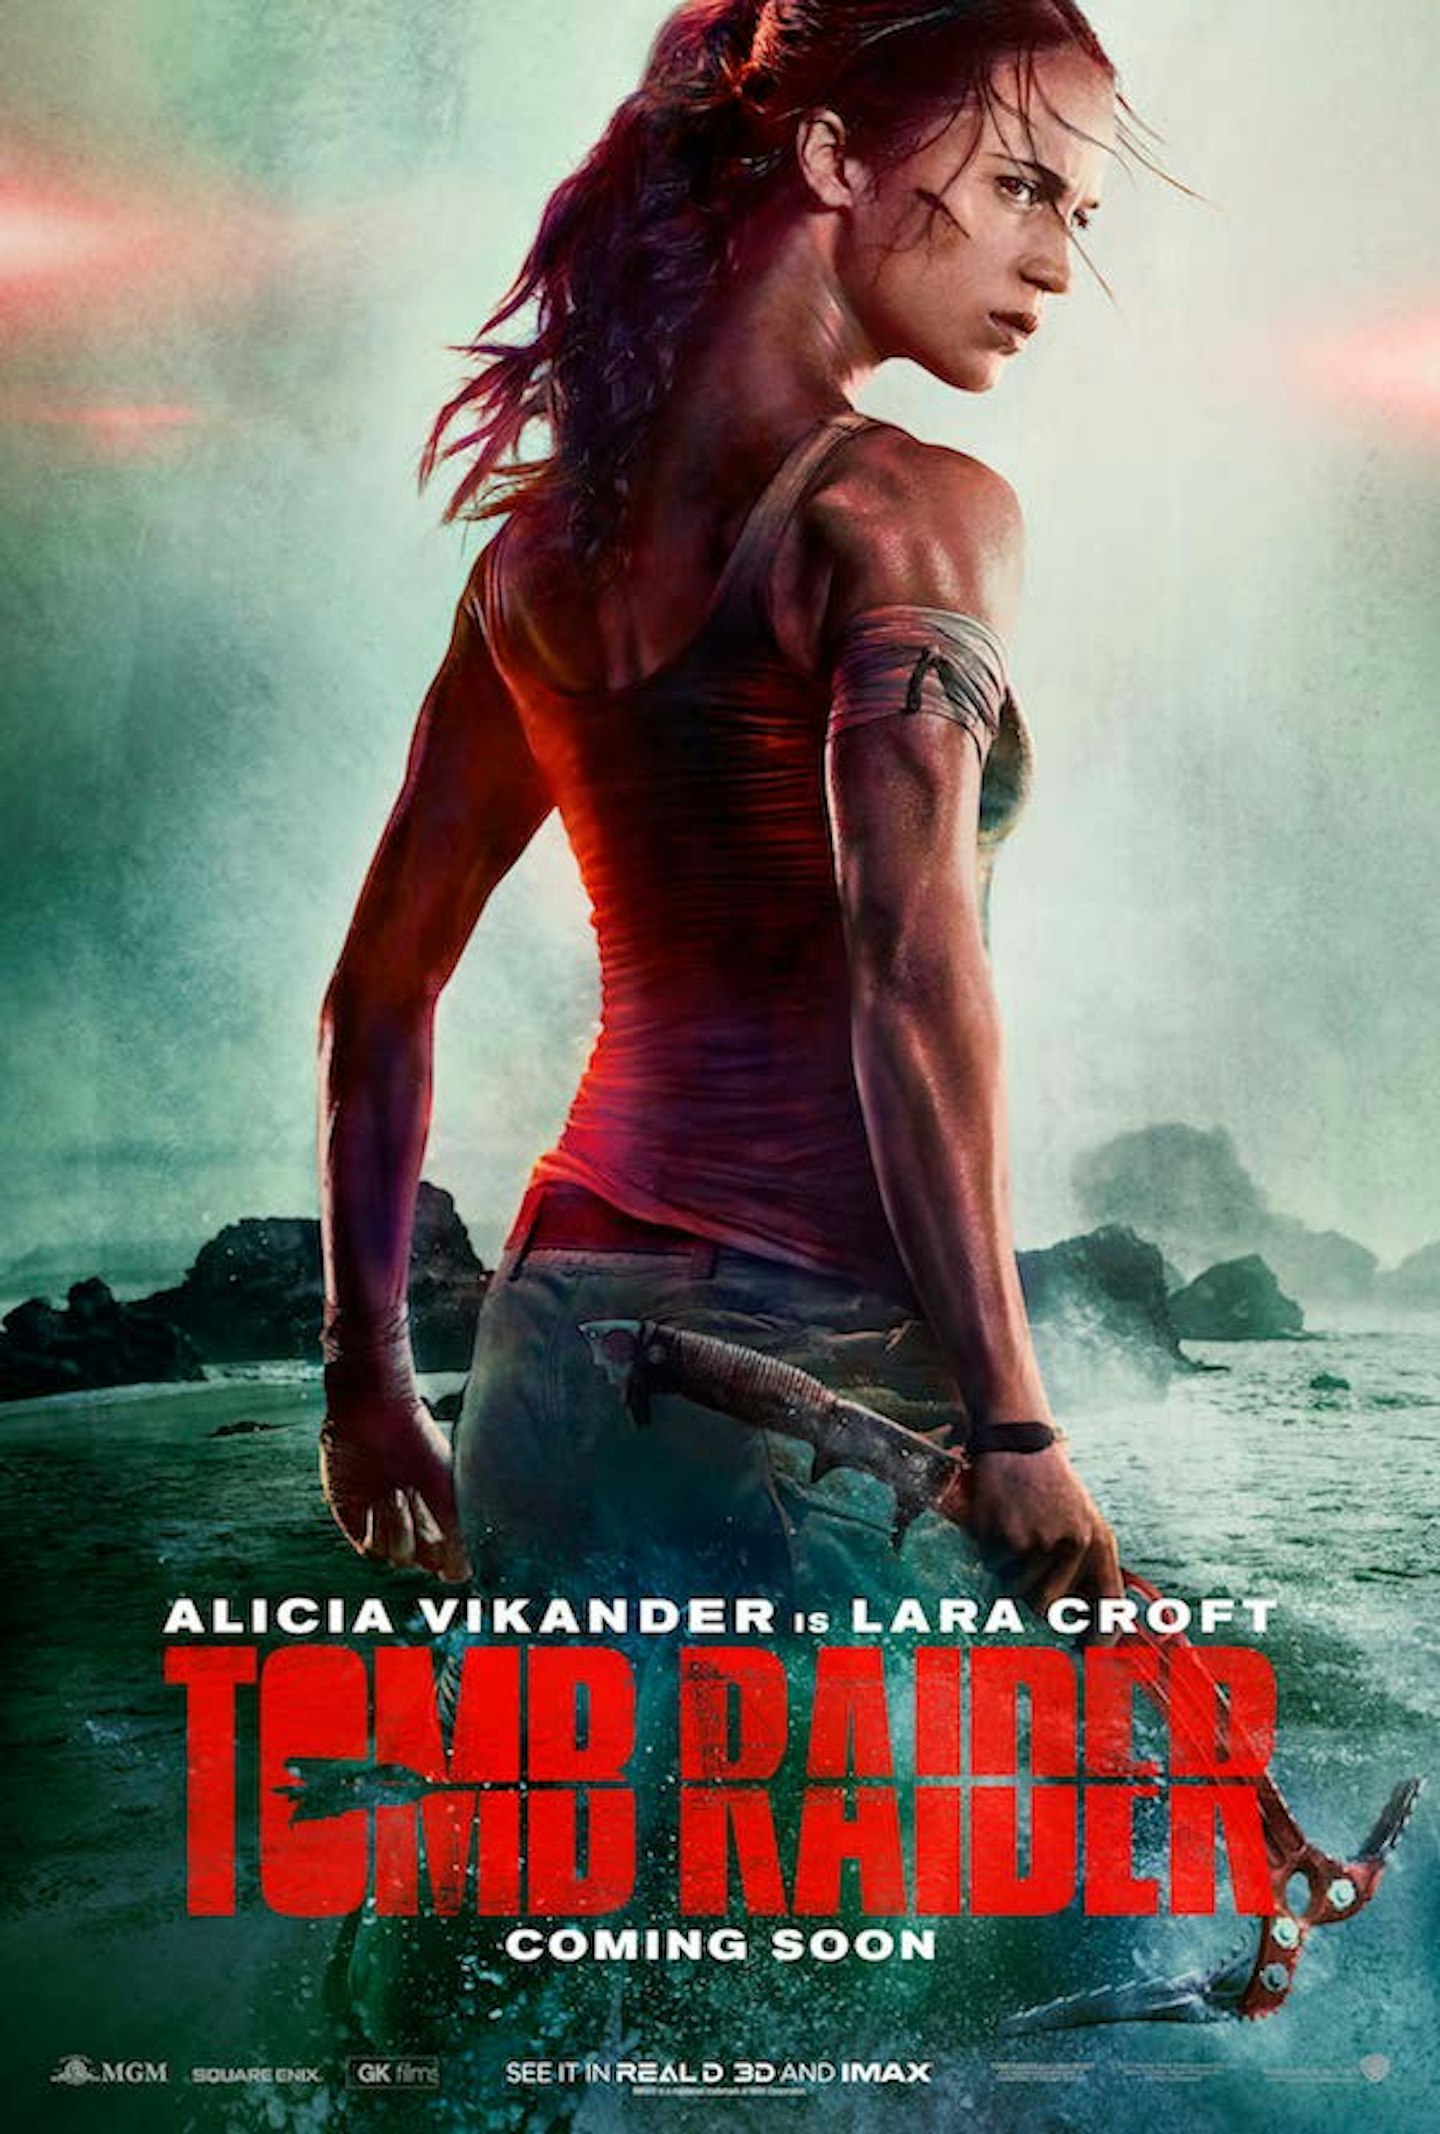 Alicia Vikander as Lara Croft in the first poster for Tomb Raider